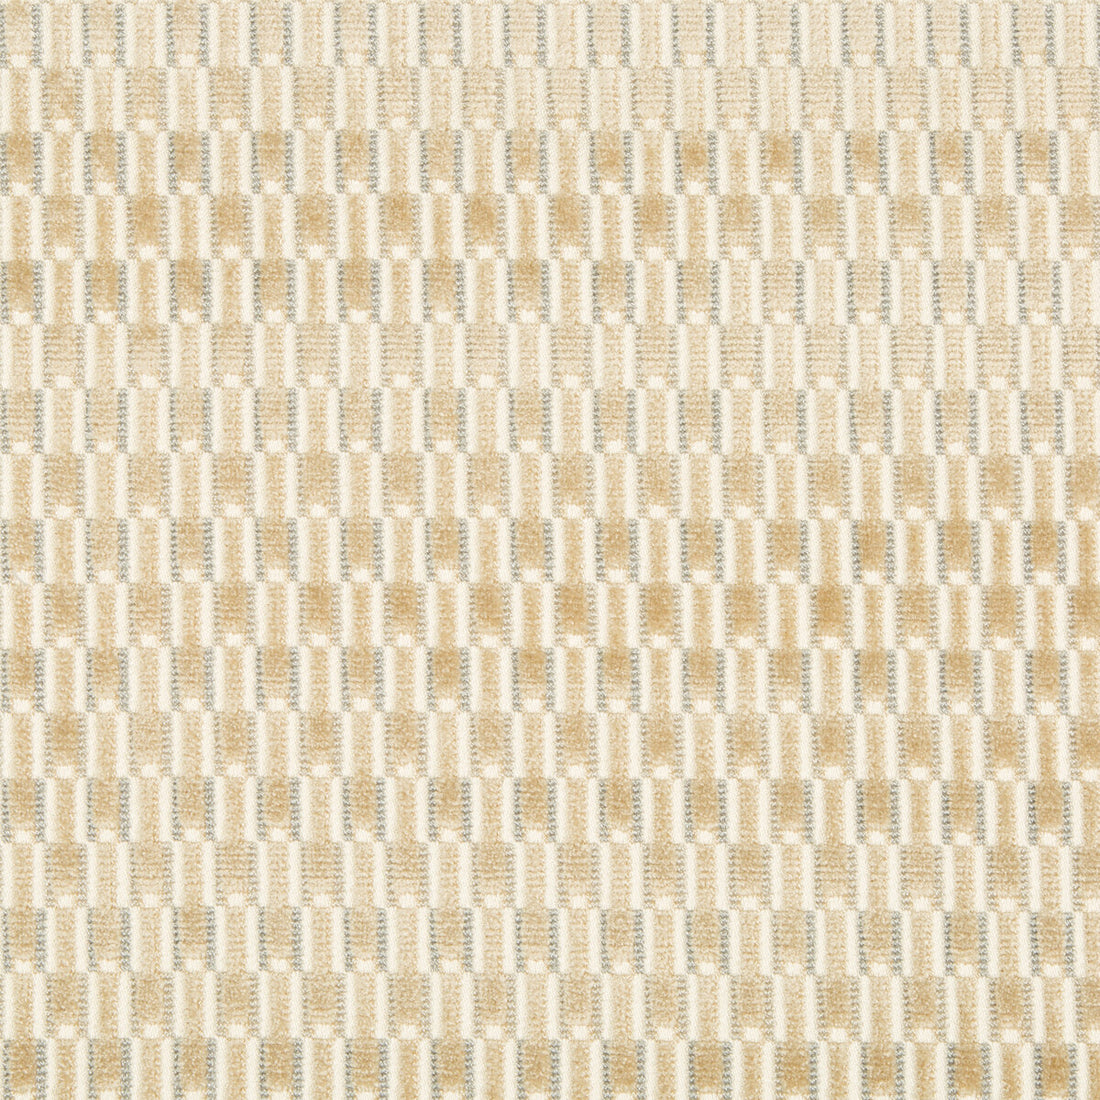 Finishing Touch fabric in stone color - pattern 34791.16.0 - by Kravet Couture in the Artisan Velvets collection